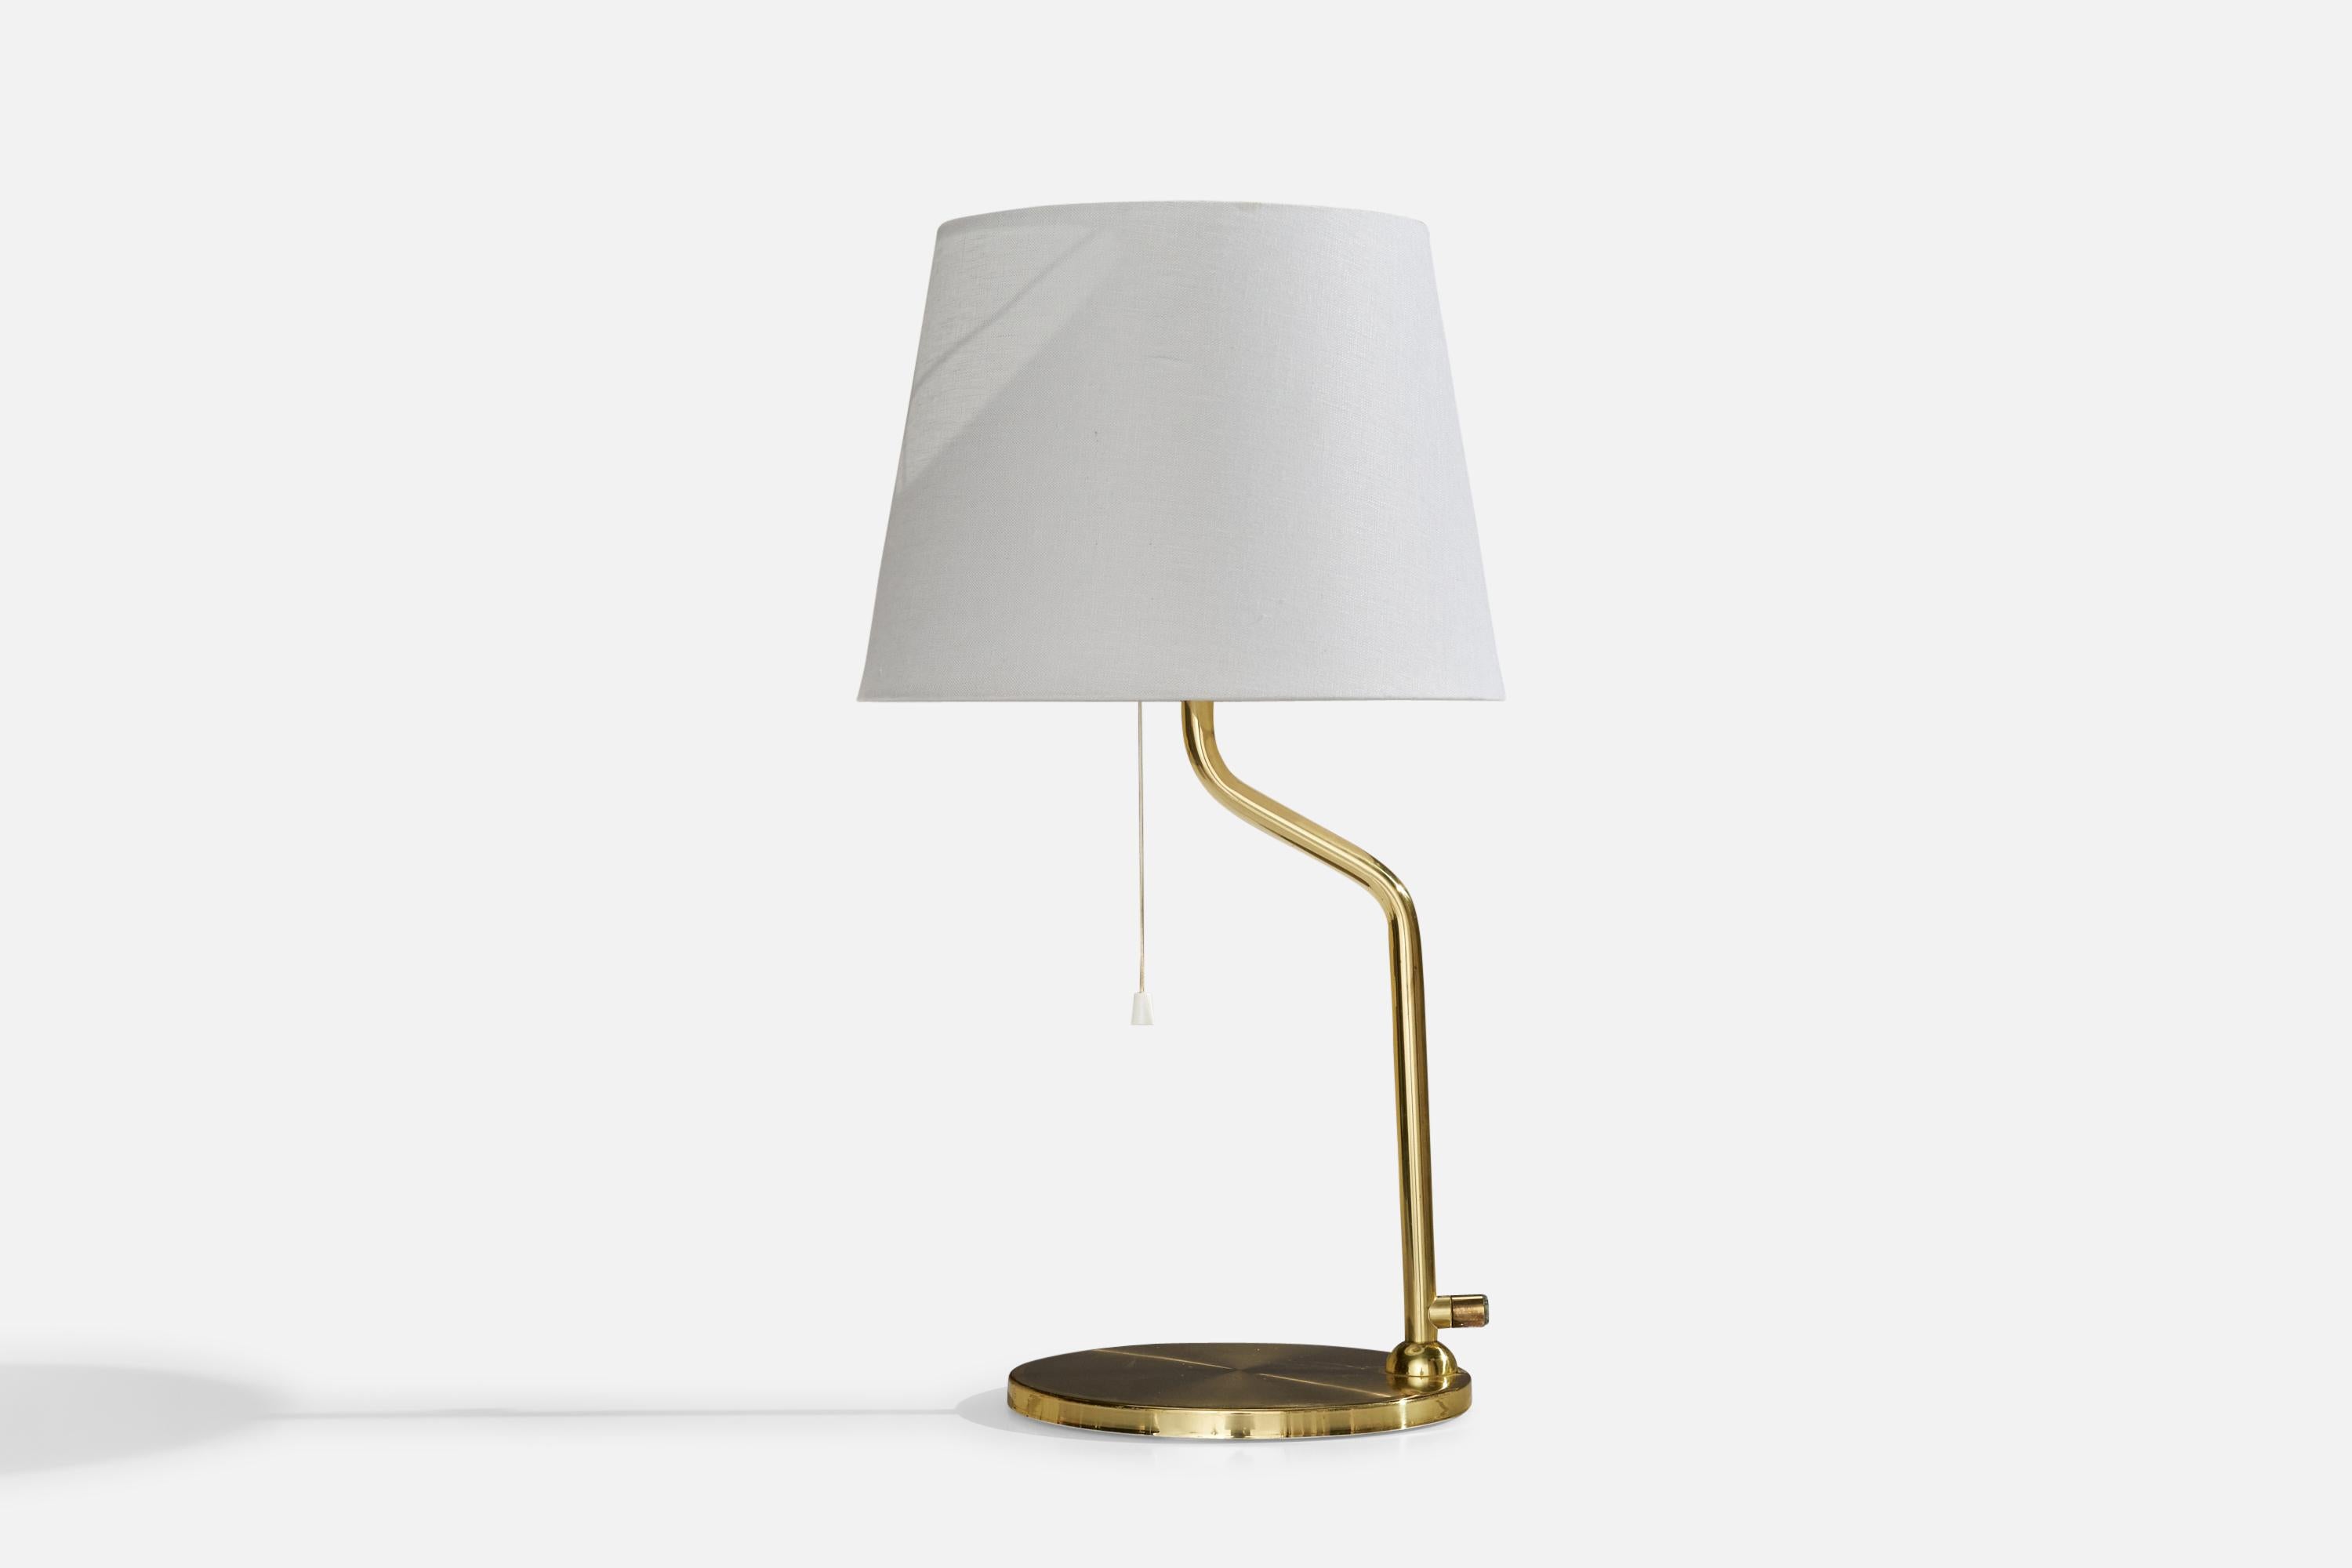 A brass table lamp designed and produced by Nya Öia, Sweden, 1970s.

Dimensions of Lamp (inches): 21.75”  H x 8.5” Diameter
Dimensions of Shade (inches): 9”  Top Diameter x 12”  Bottom Diameter x 9” H
Dimensions of Lamp with Shade (inches): 22”  H x